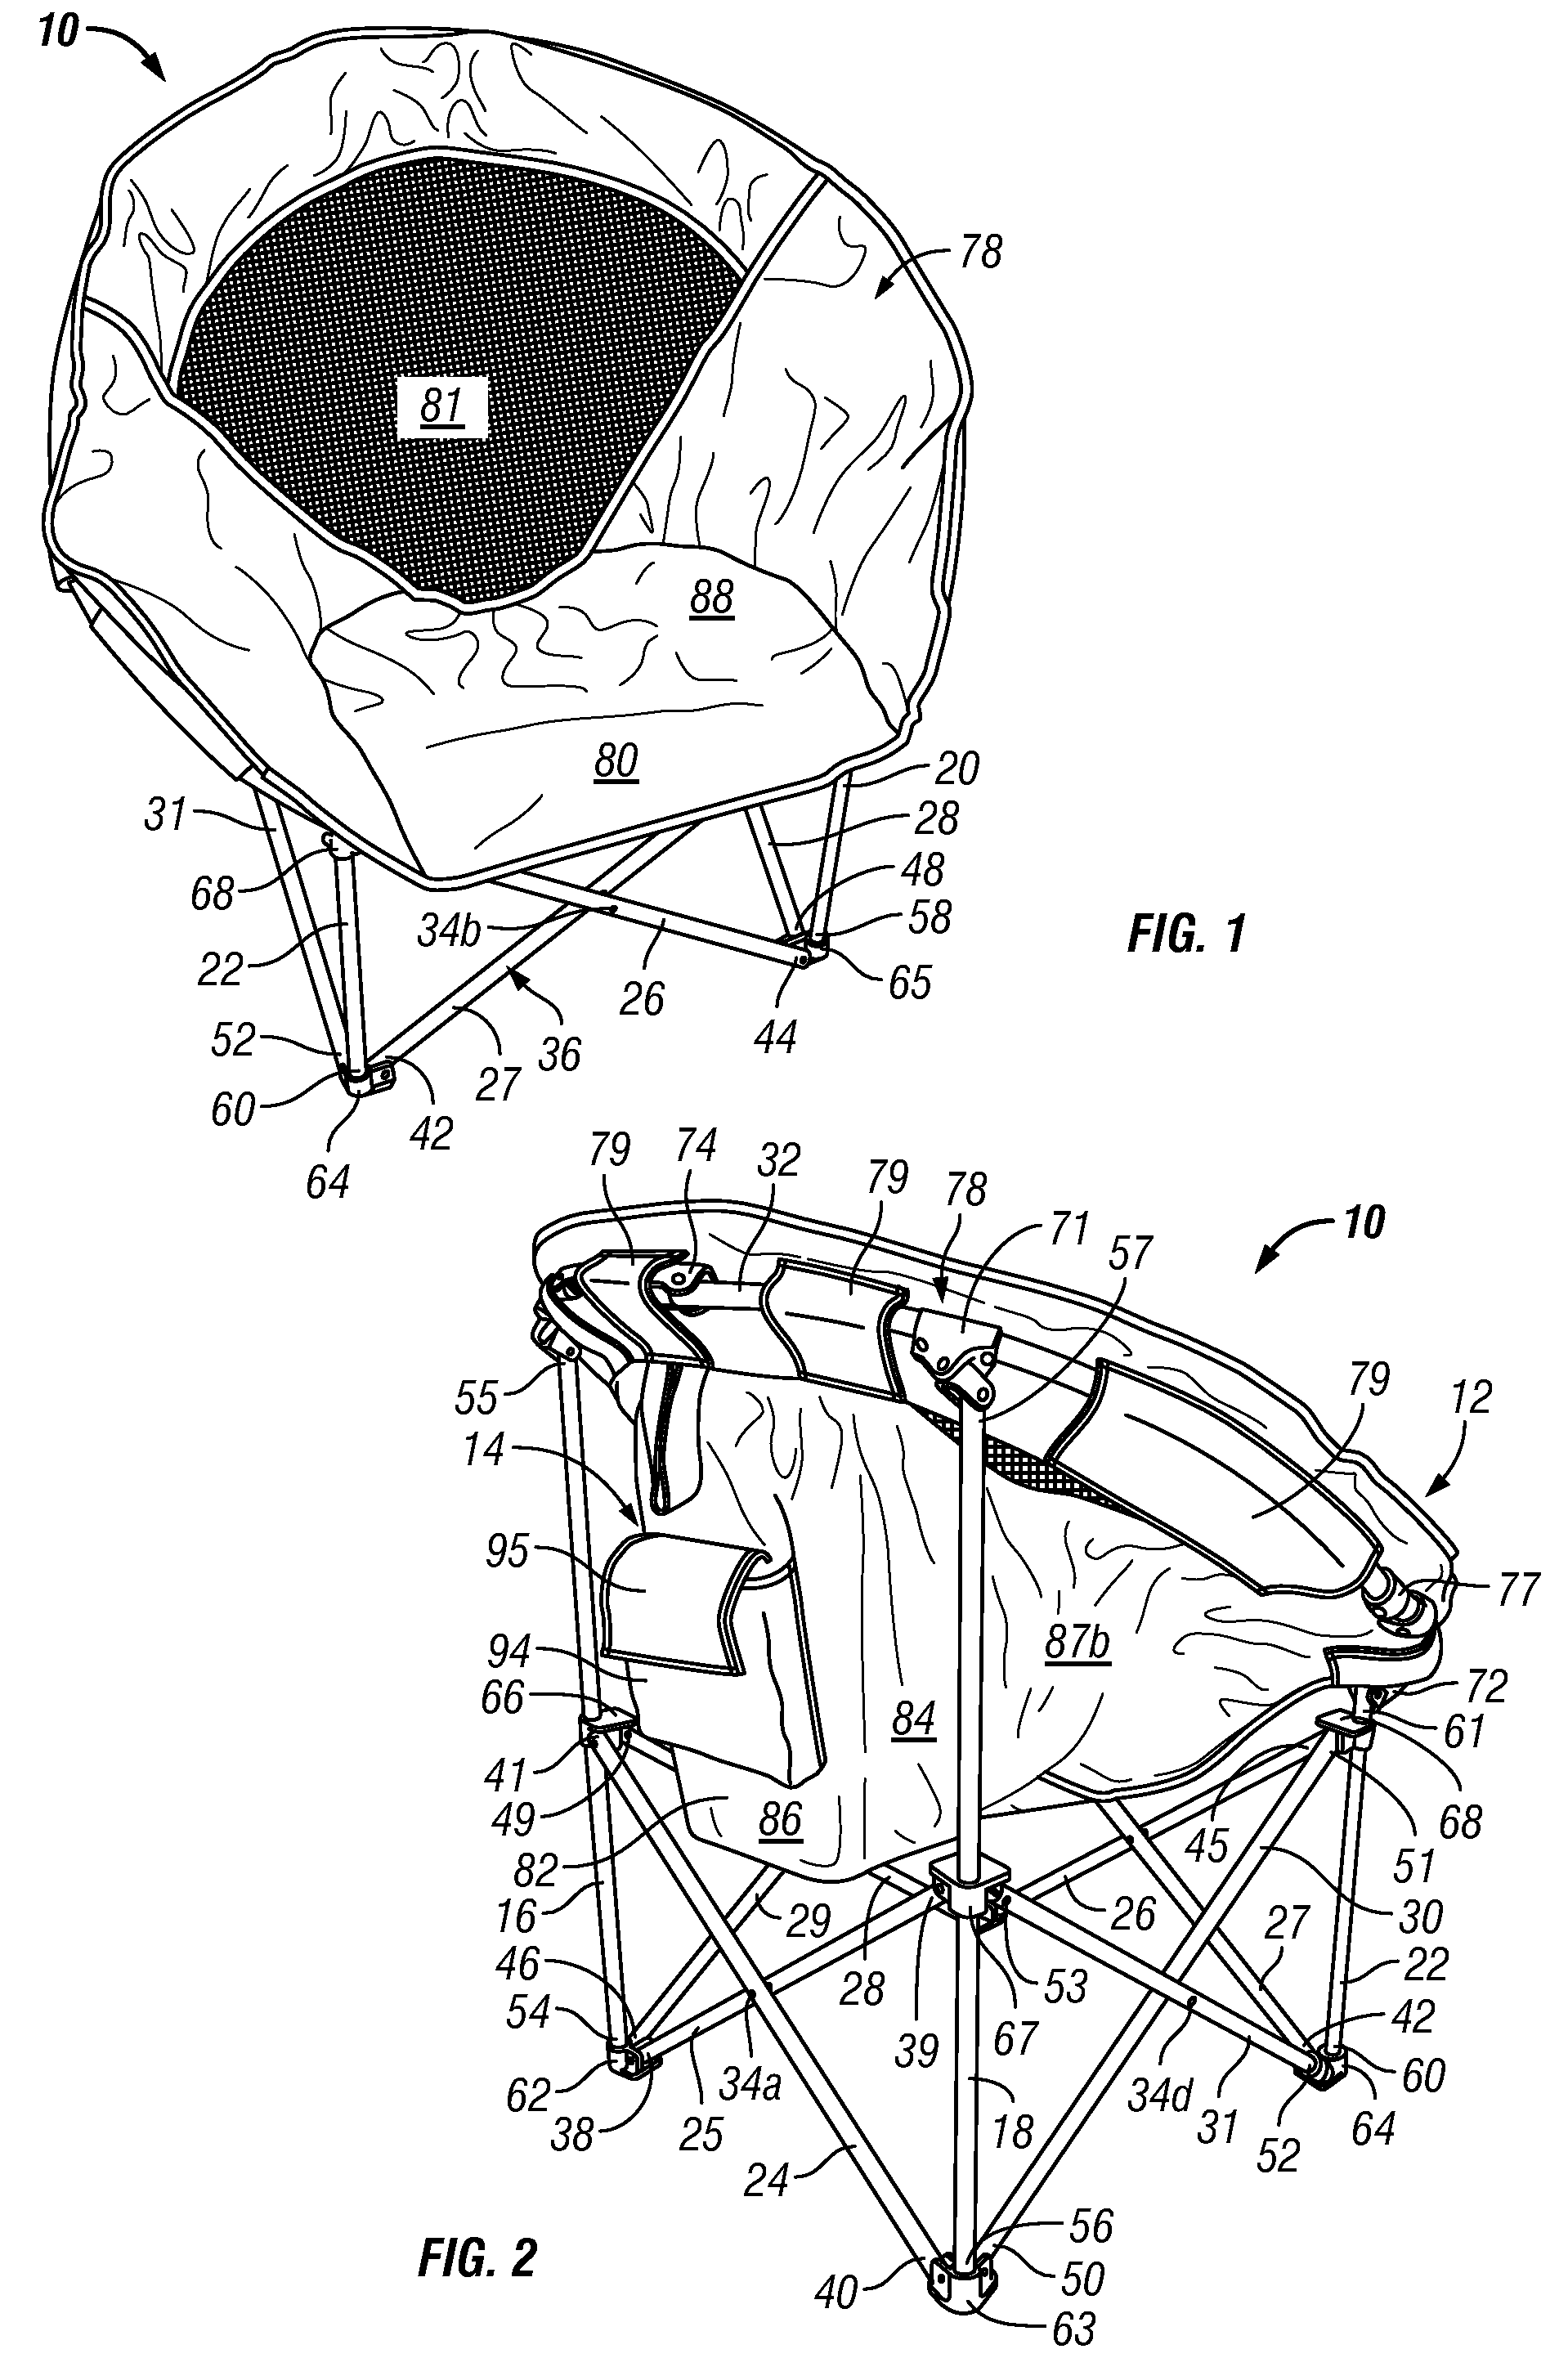 Foldable chair with forced air cooling system